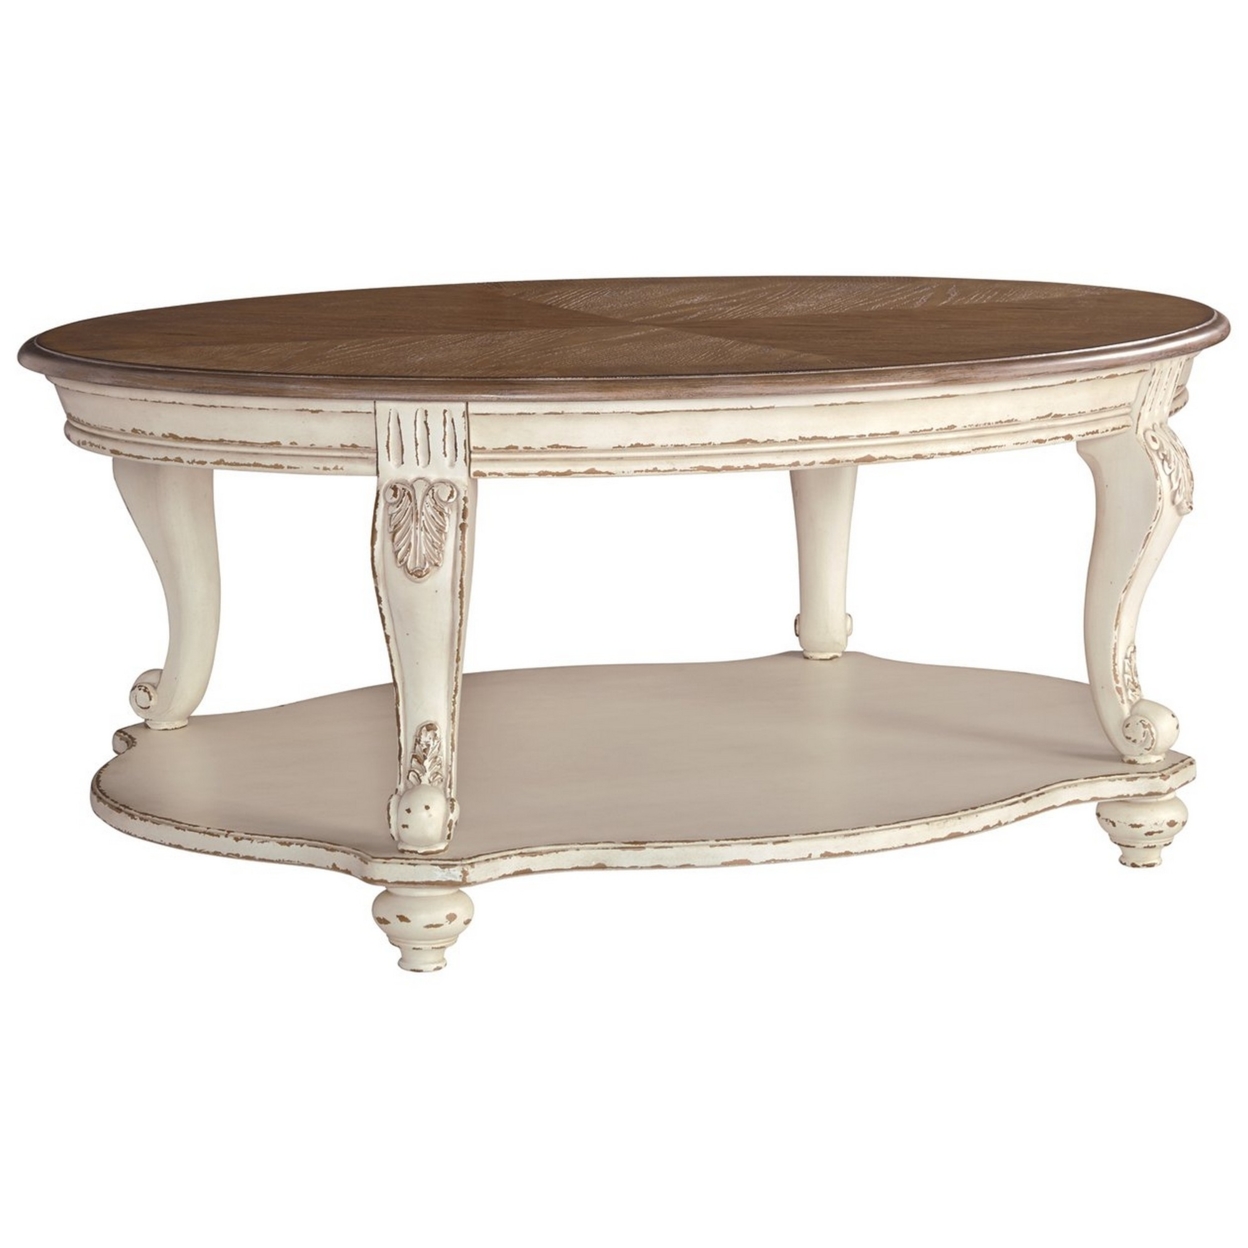 Two Tone Oval Cocktail Table With Bottom Shelf, Antique White And Brown- Saltoro Sherpi